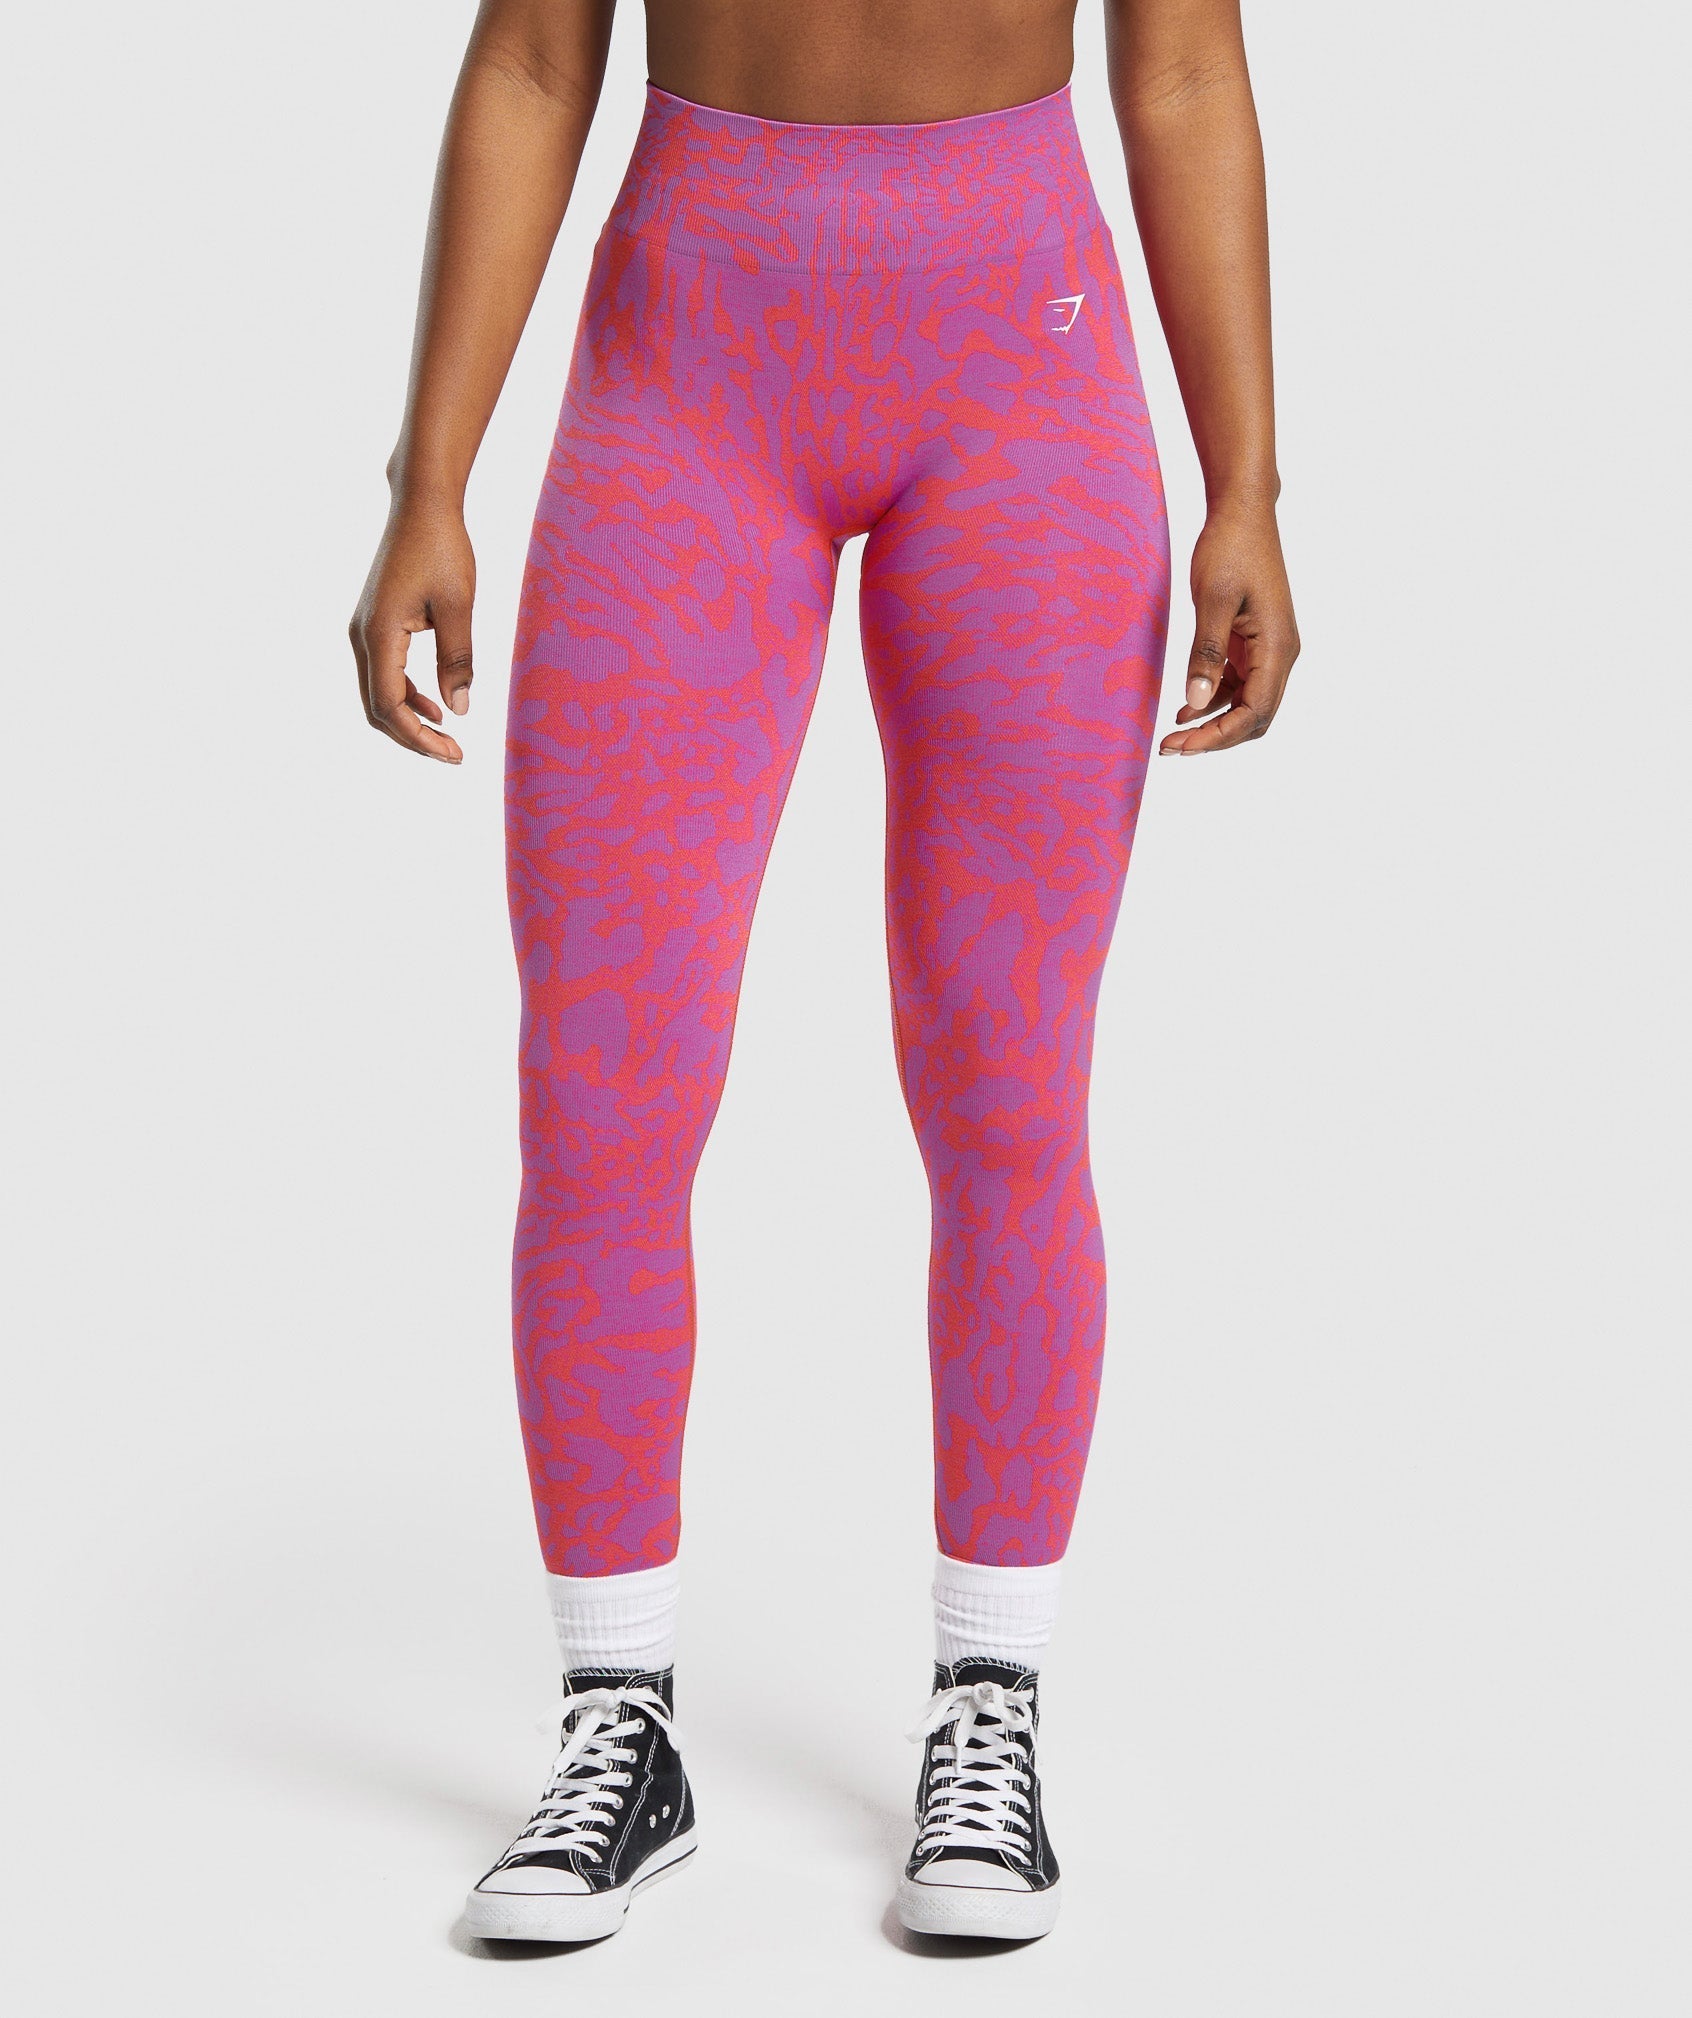 Adapt Safari Seamless Leggings in Shelly Pink/Fly Coral - view 1